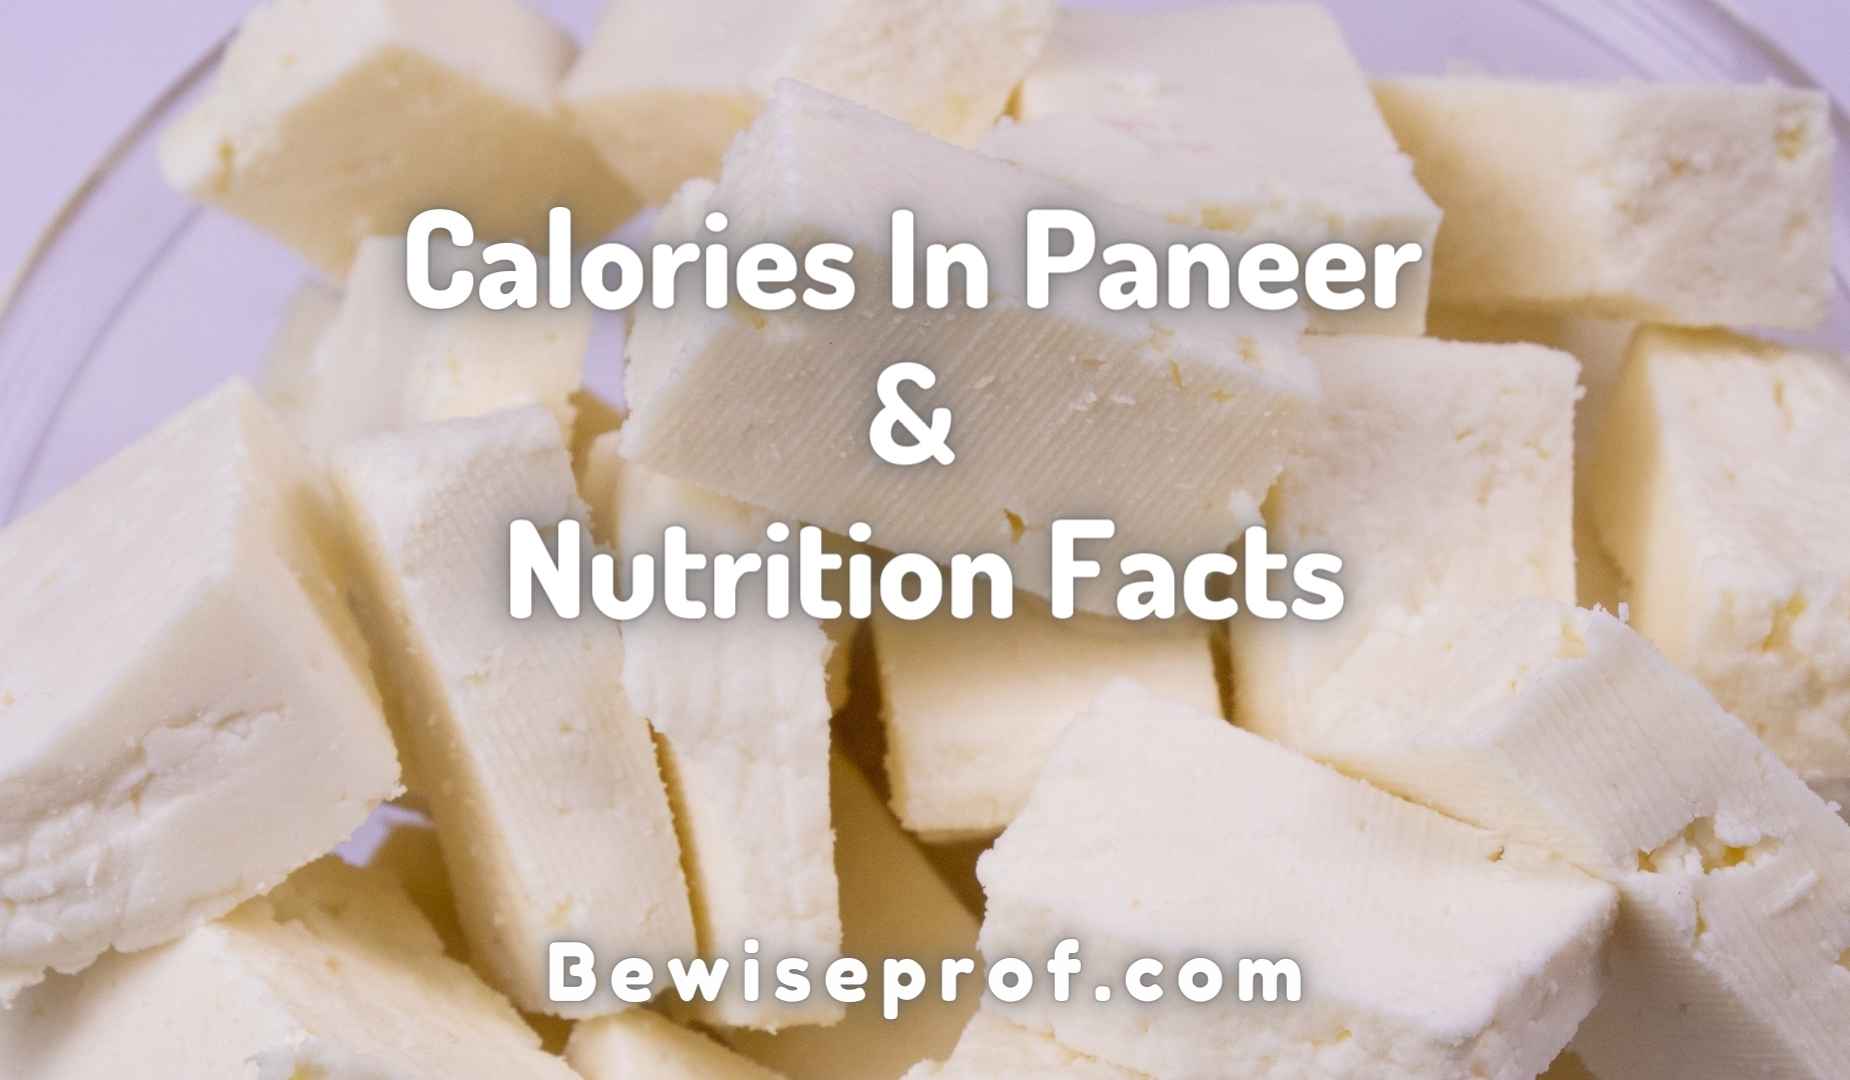 Calories In Paneer & Nutrition Facts